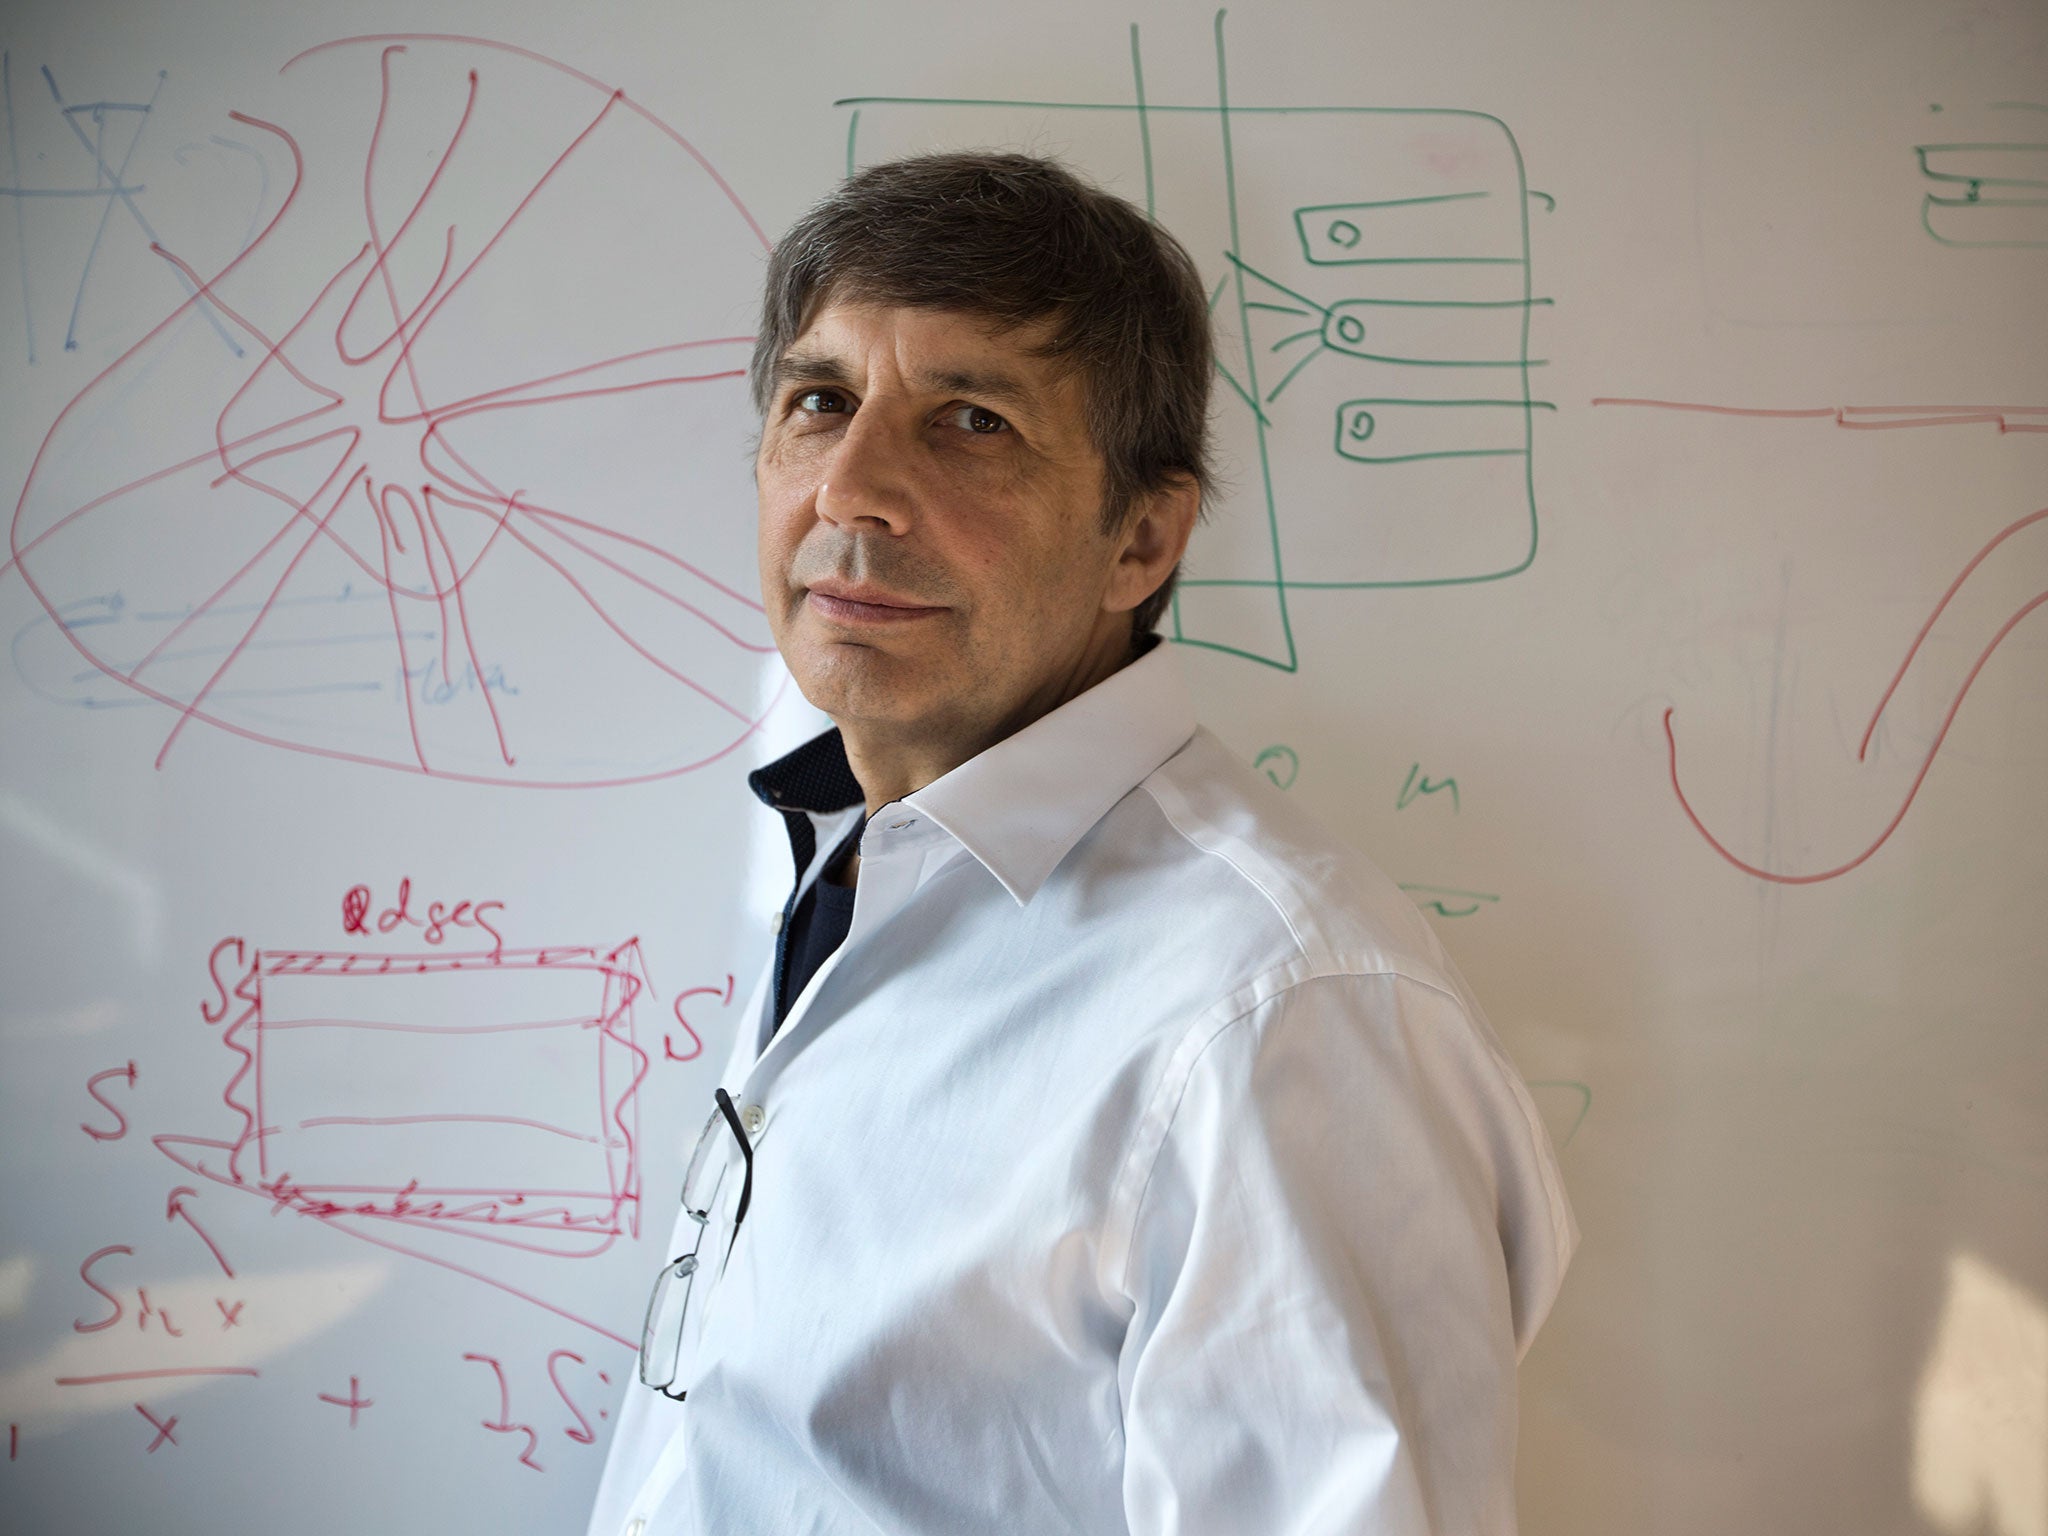 Sir Andre Geim, who isolated Graphene at Manchester University, is a Russian immigrant